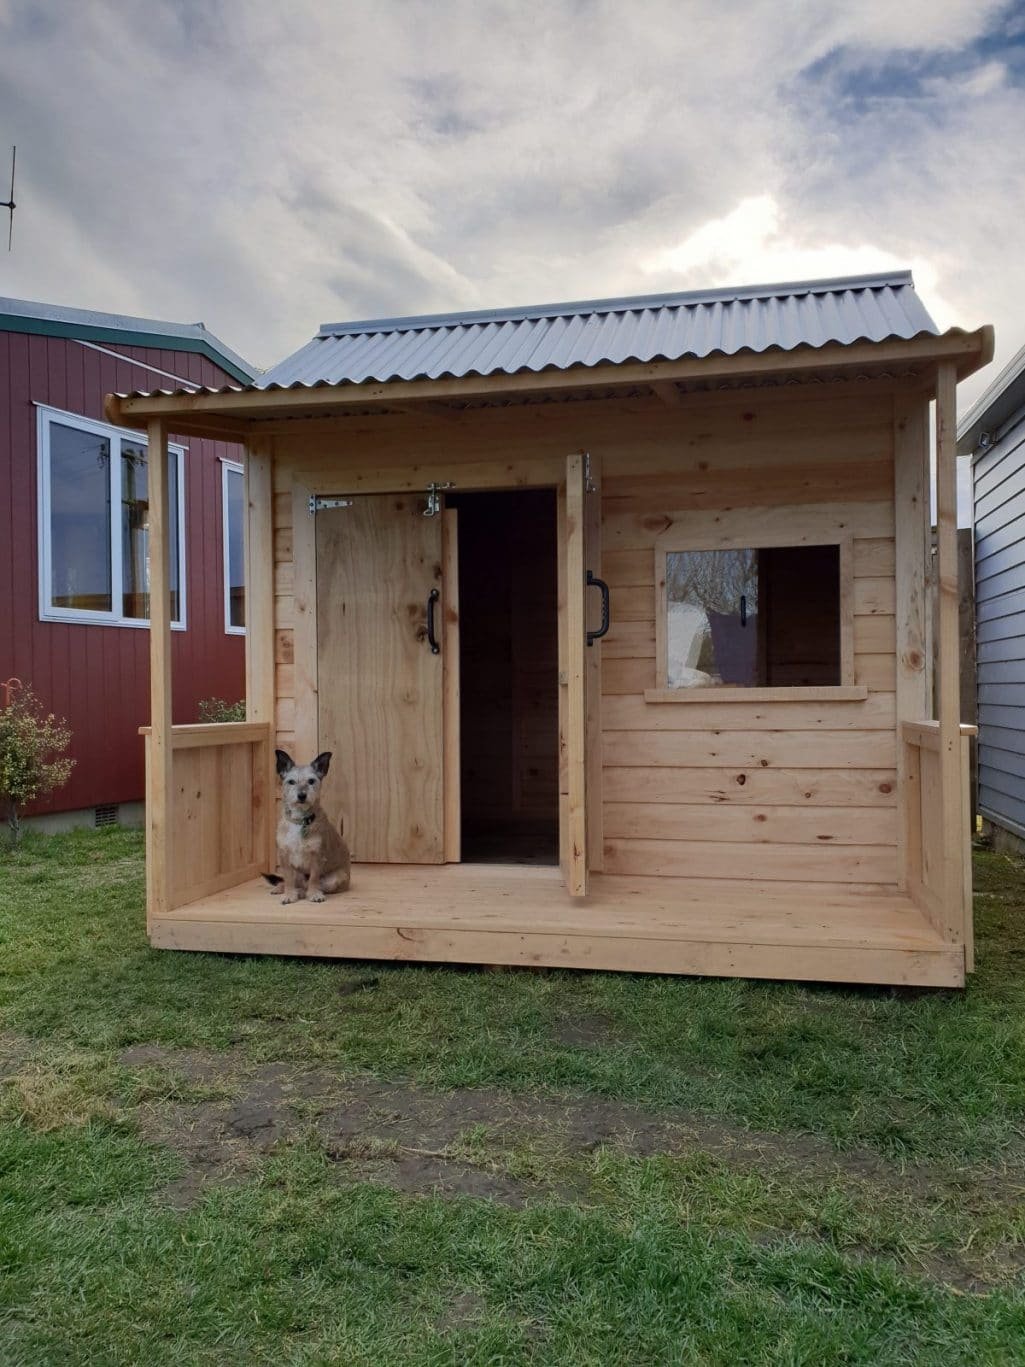 Doggy Day Care News - a play house for the dogs!